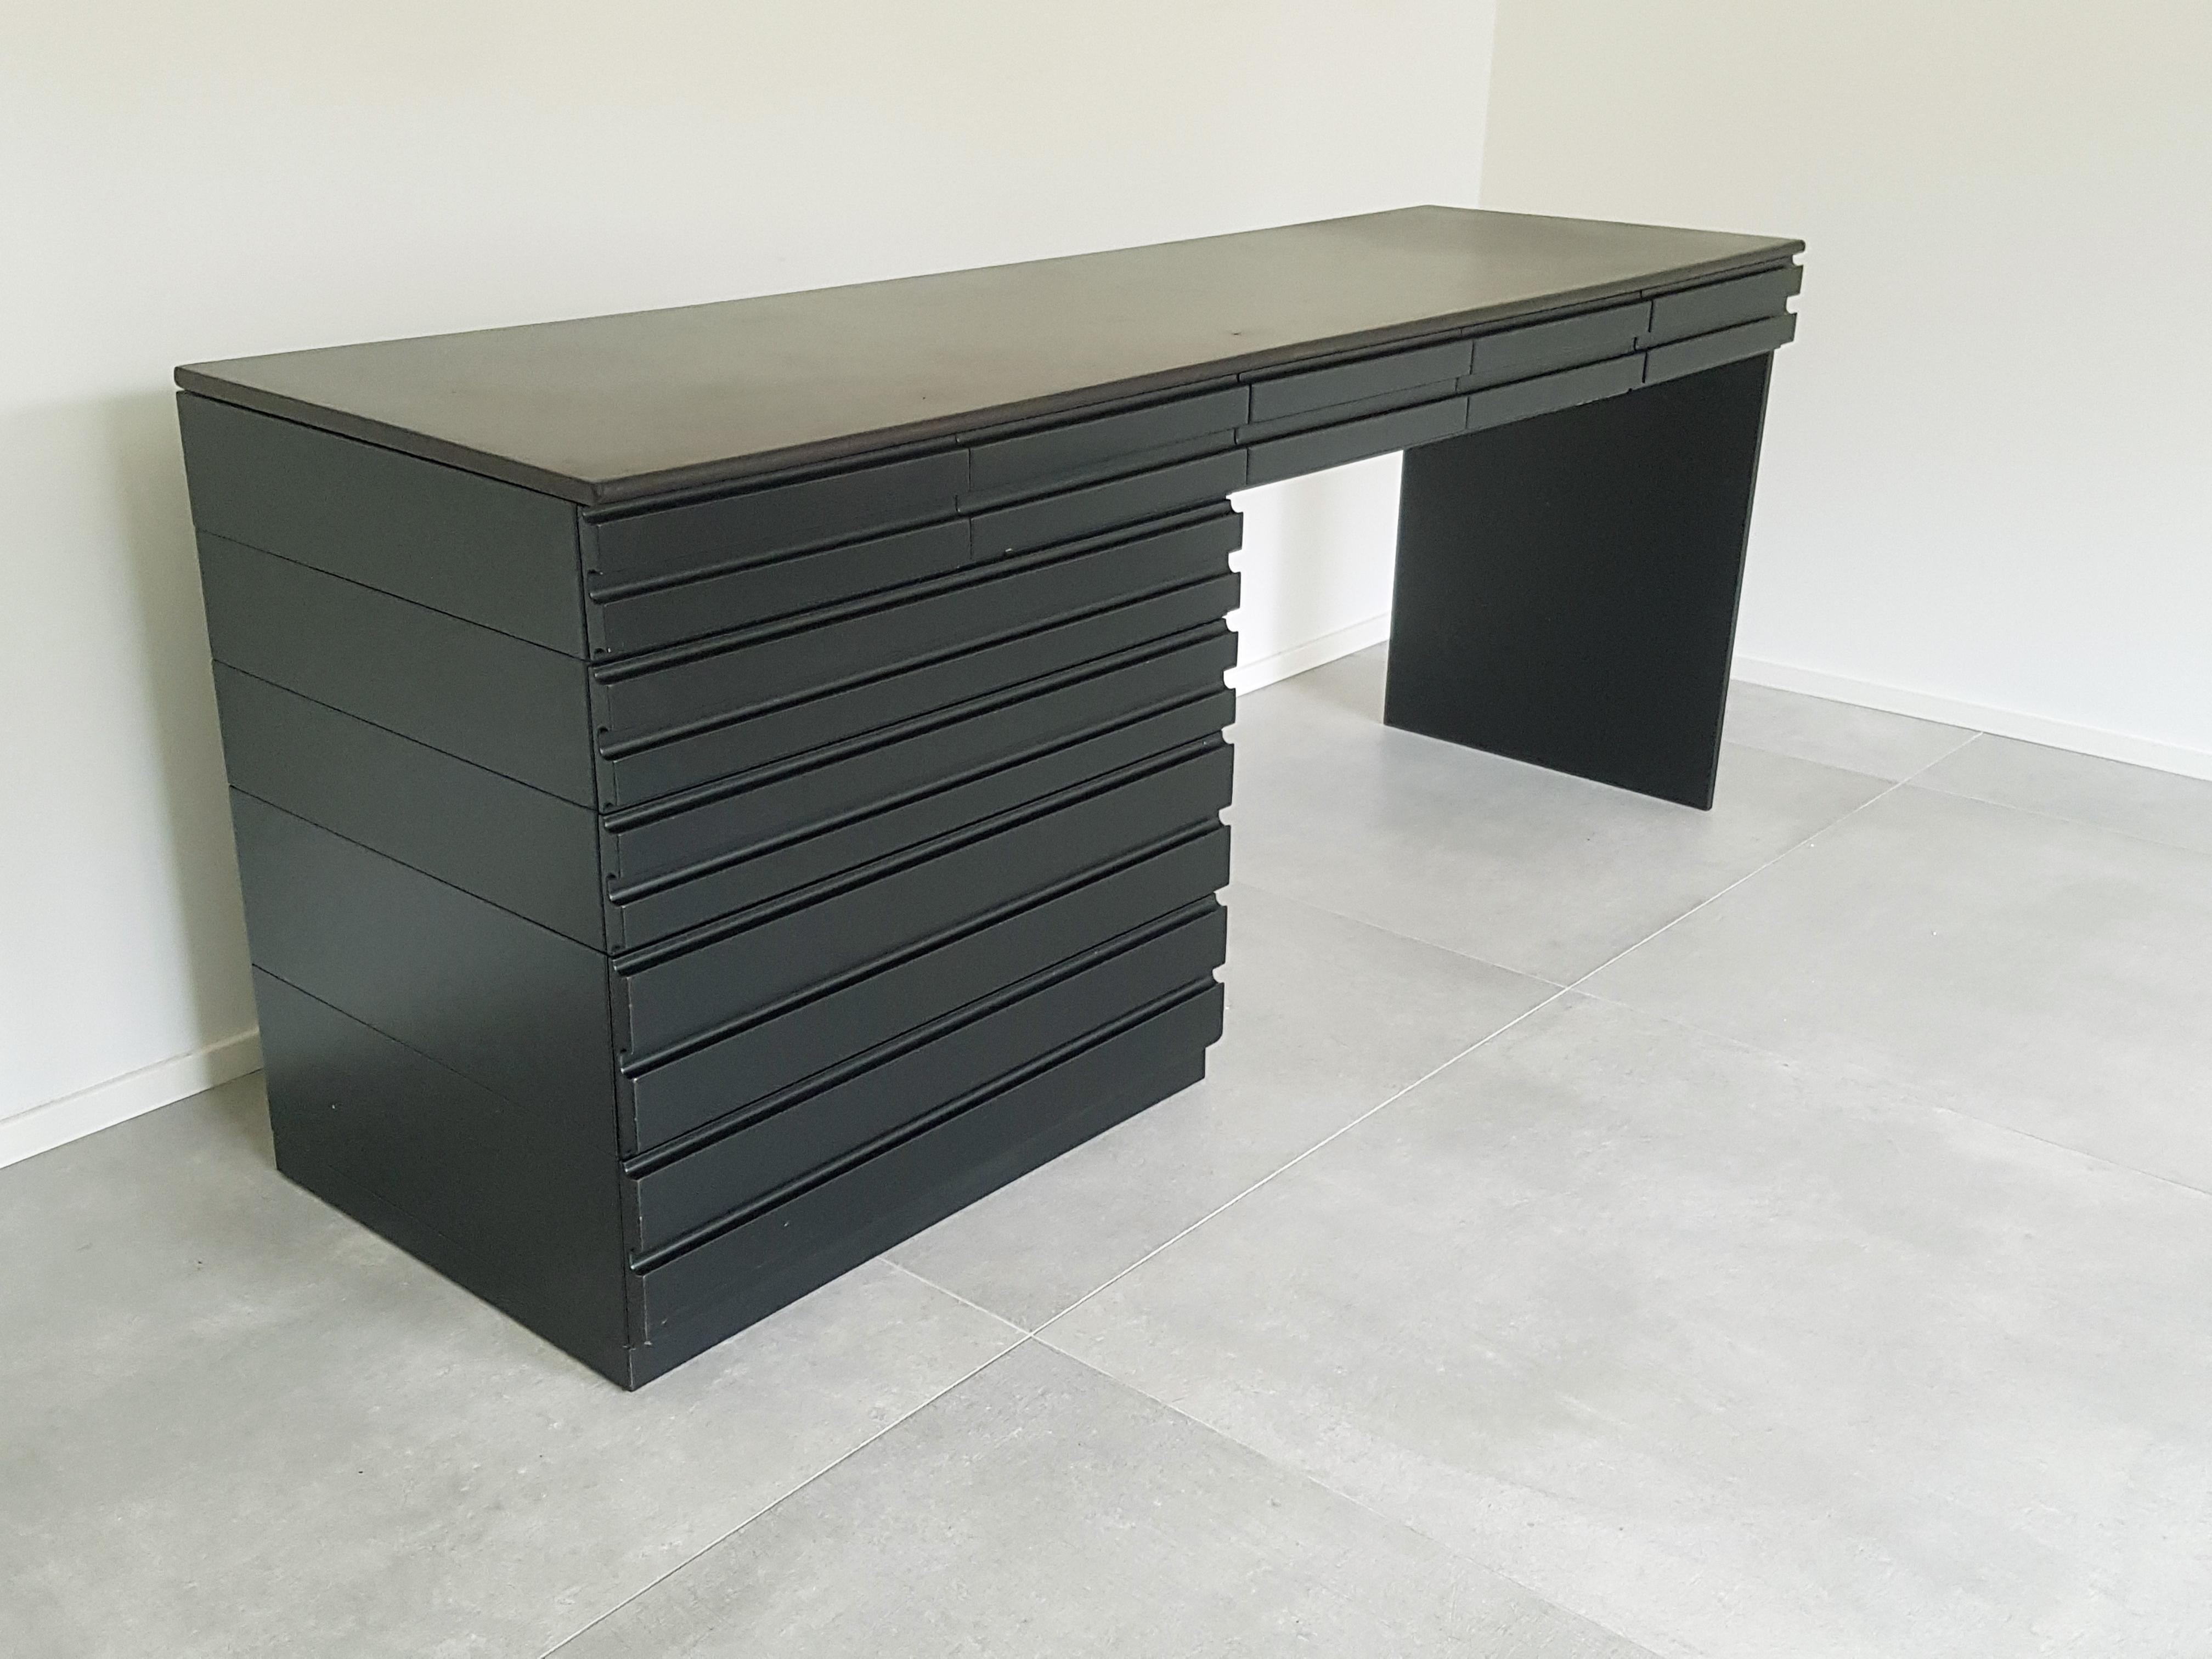 Large desk or vanity desk in black lacquered wood with top covered in leather from the series of modular cabinets 